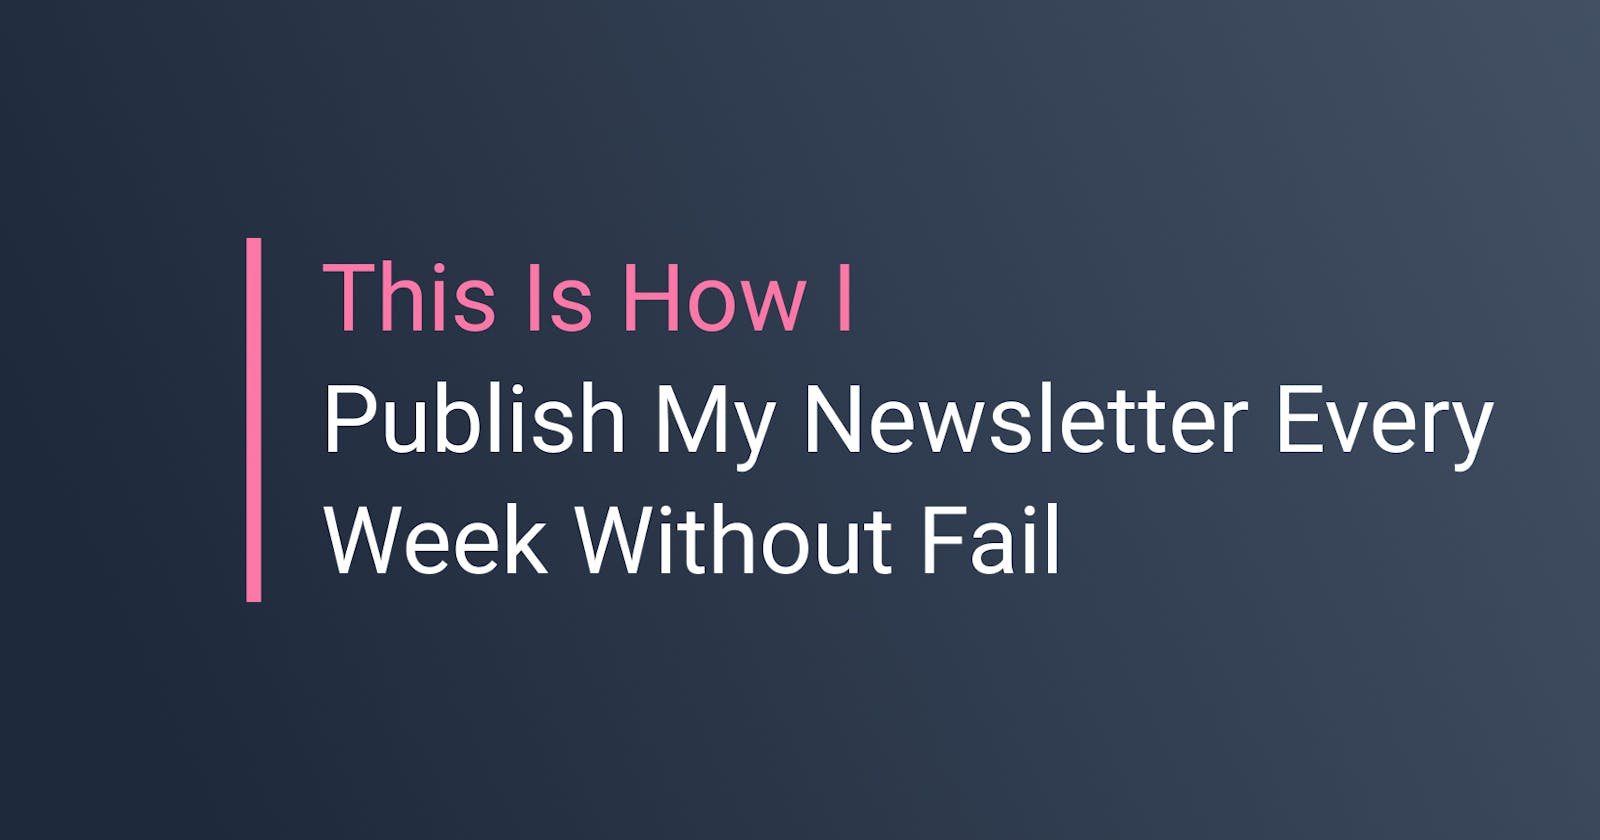 This Is How I Publish My Newsletter Every Week Without Fail